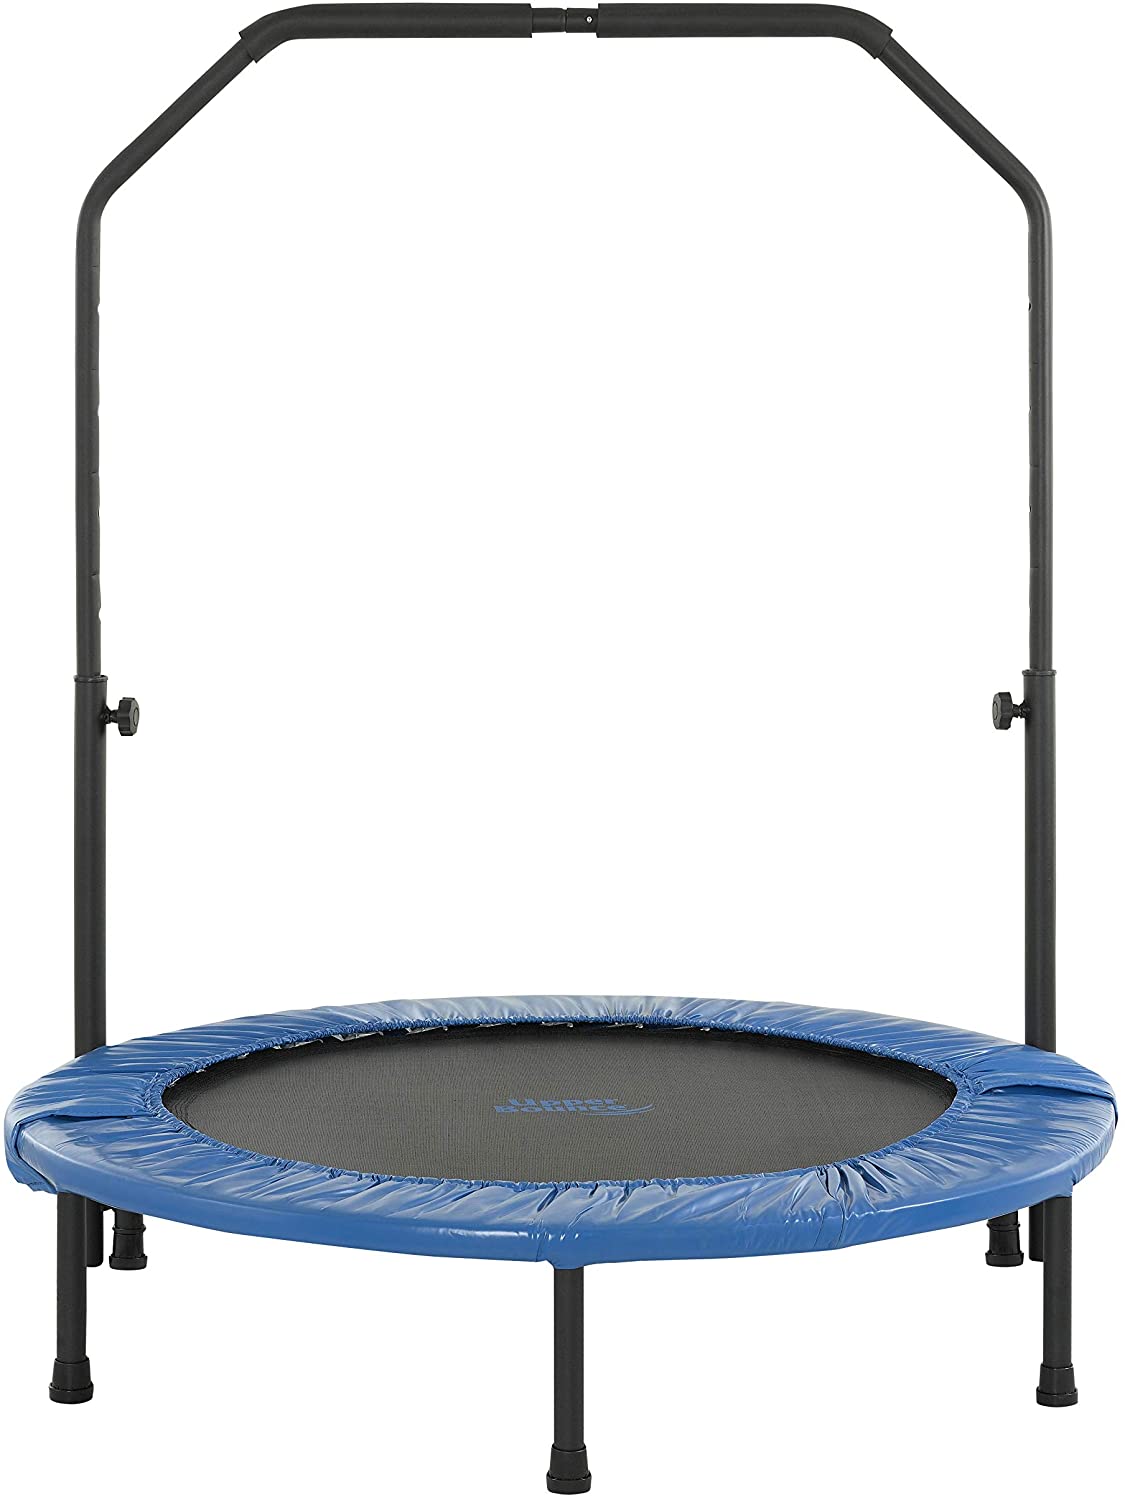 Upper Bounce - Mini Fitness Exercise Trampoline Rebounder Trampette for Gym, Indoor Workout, Cardio, Weight Loss